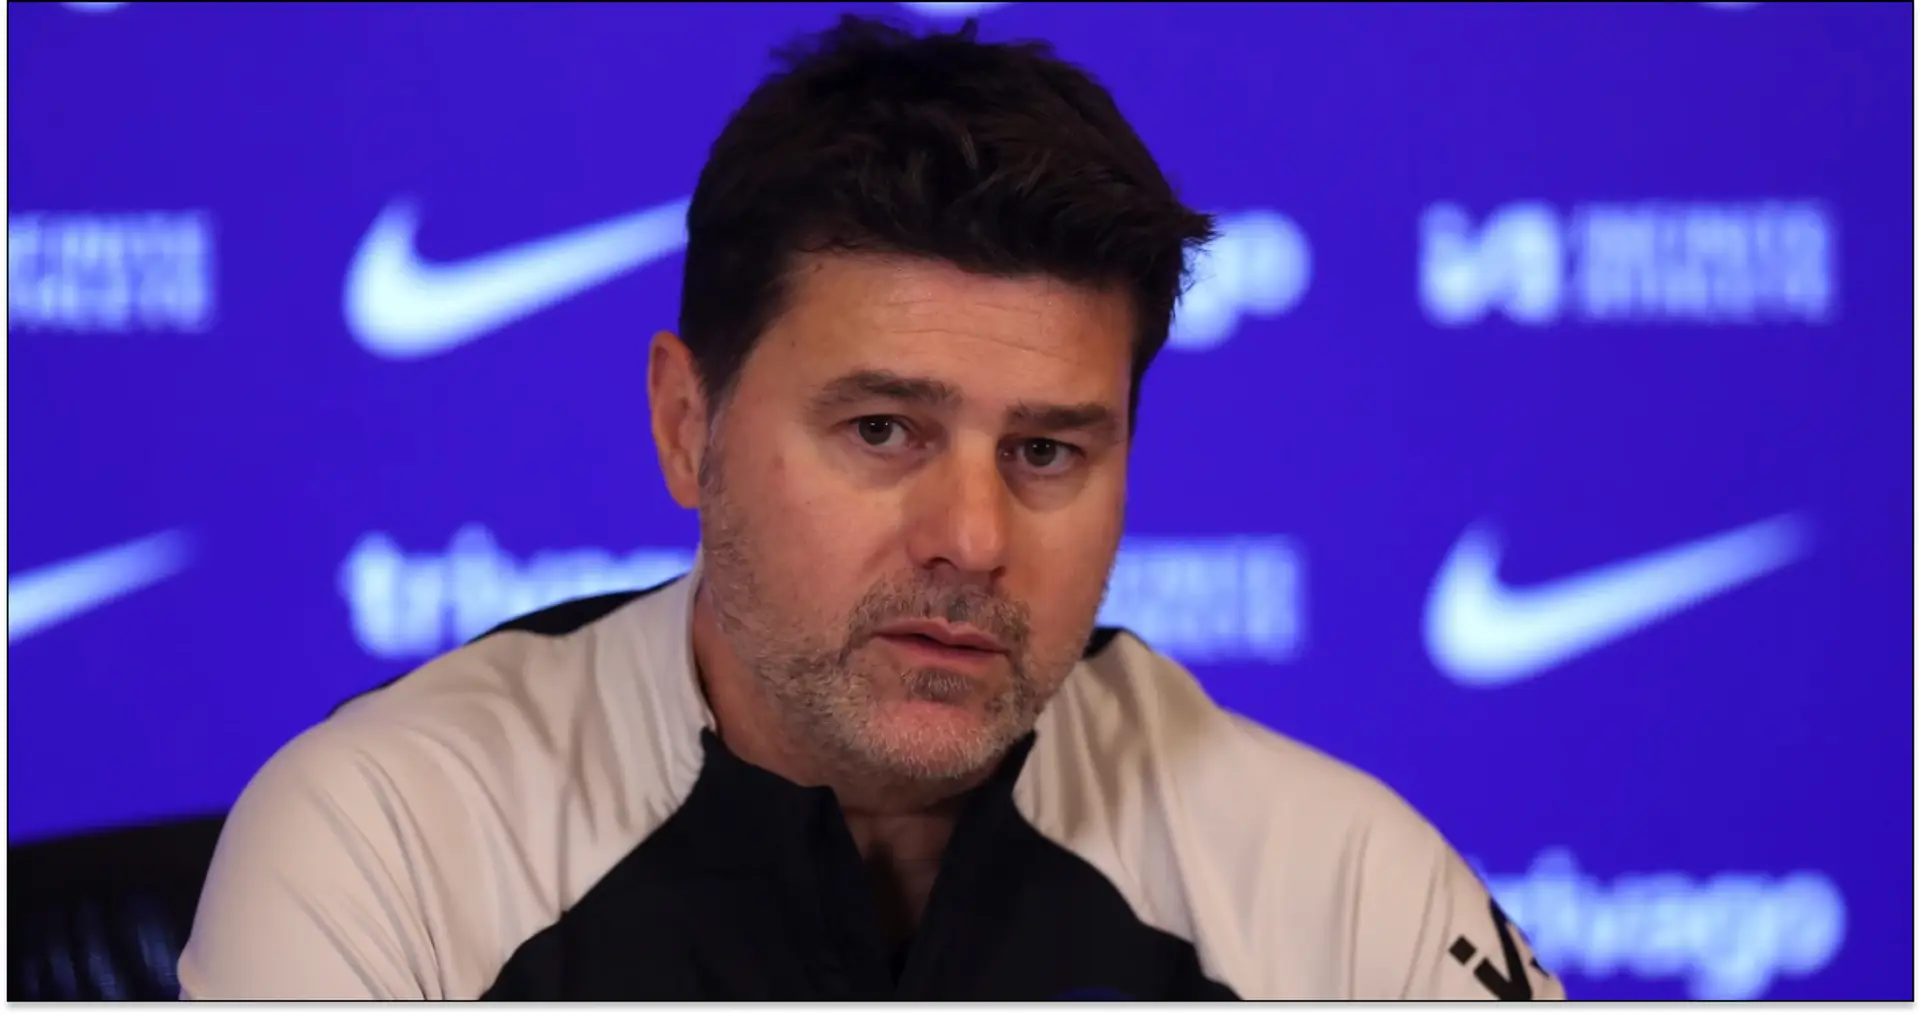 'Not only signing young players': Poch singles out one youngster who 'impressed' him as he explains Chelsea project